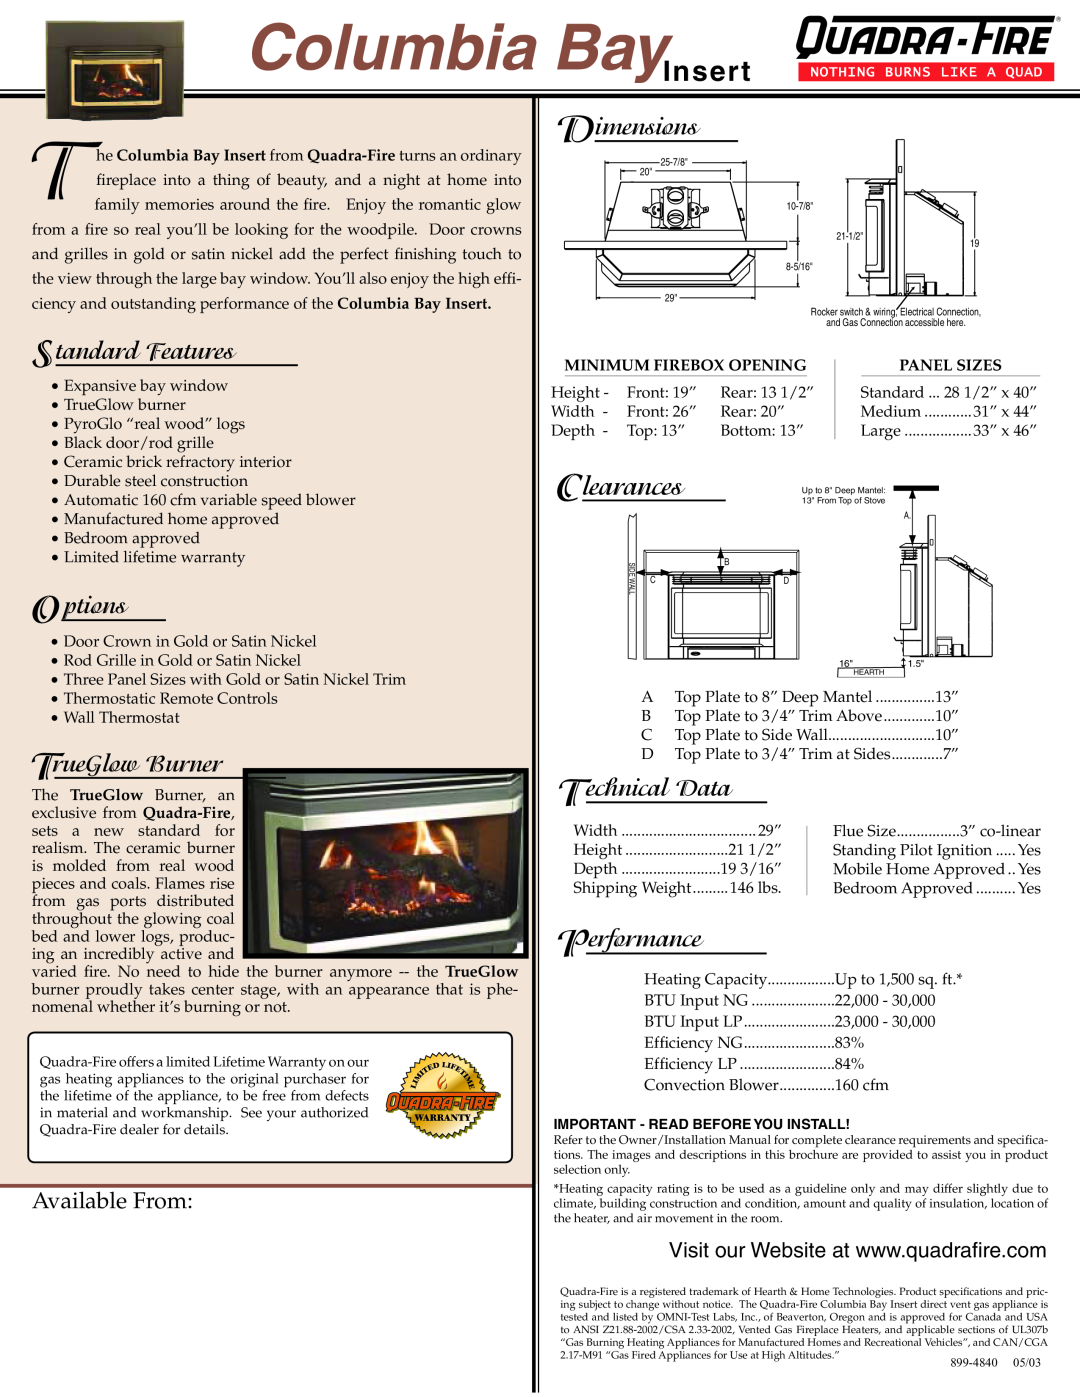 Hearth and Home Technologies Columbia Bay Insert Columbia BayInsert, Clearances, Standard Features, O ptions, Dimensions 